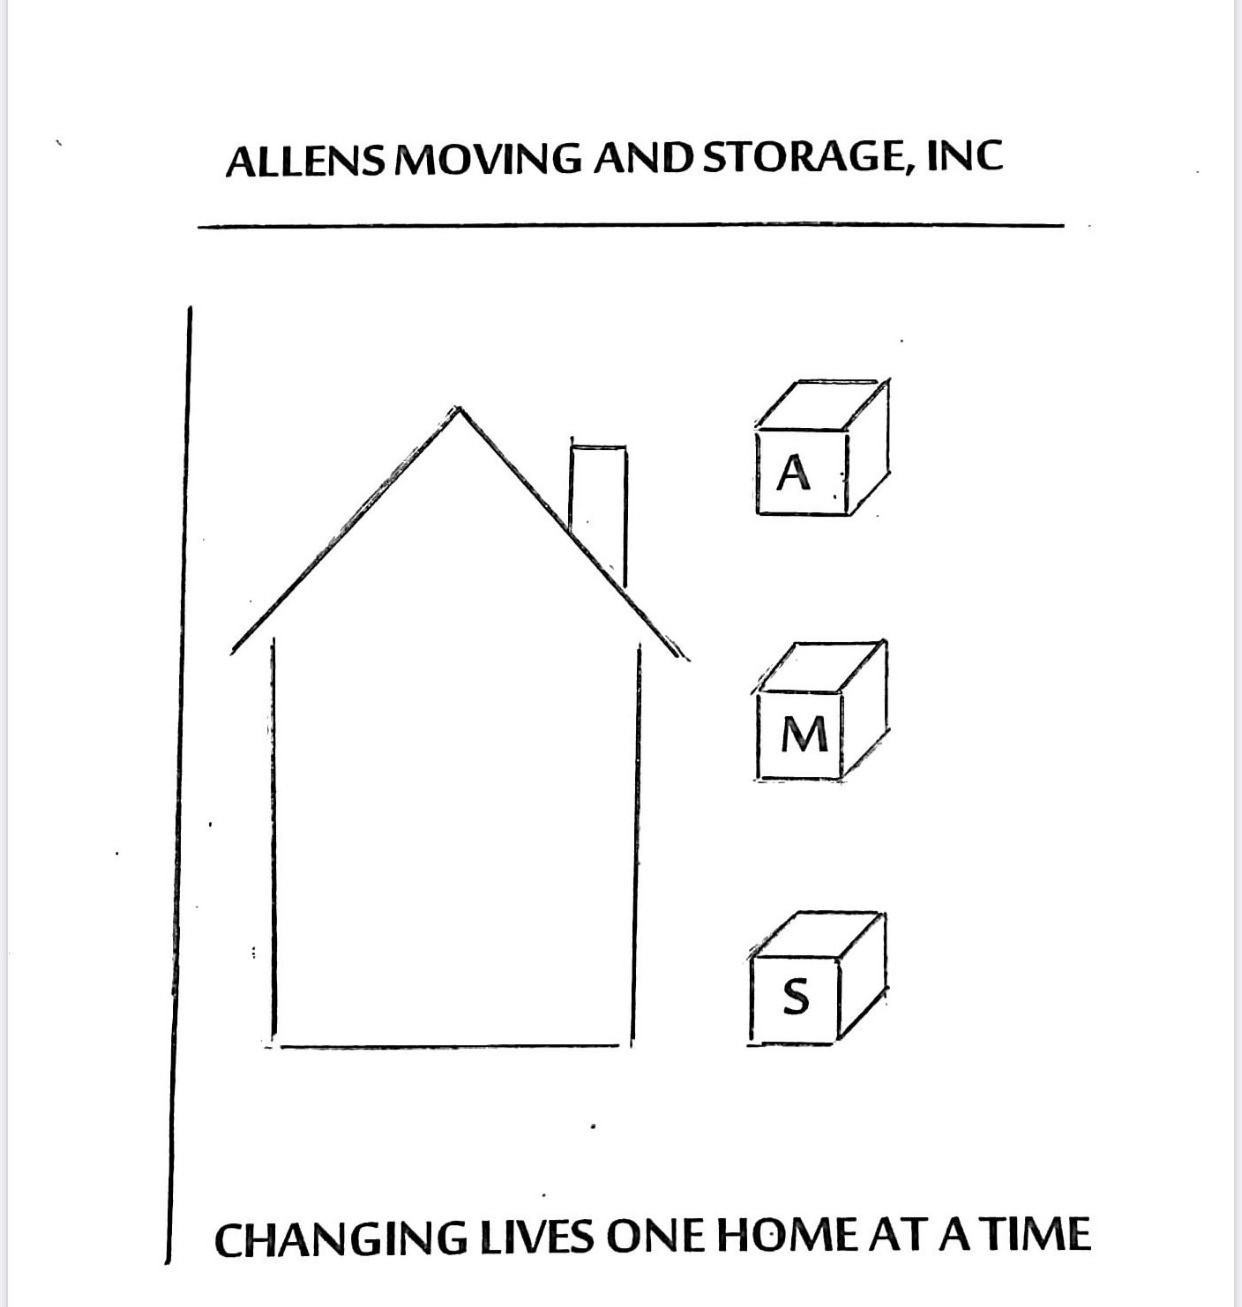  ALLENS MOVING AND STORAGE,INC AND CHANGING LIVES ONE HOME AT A TIME